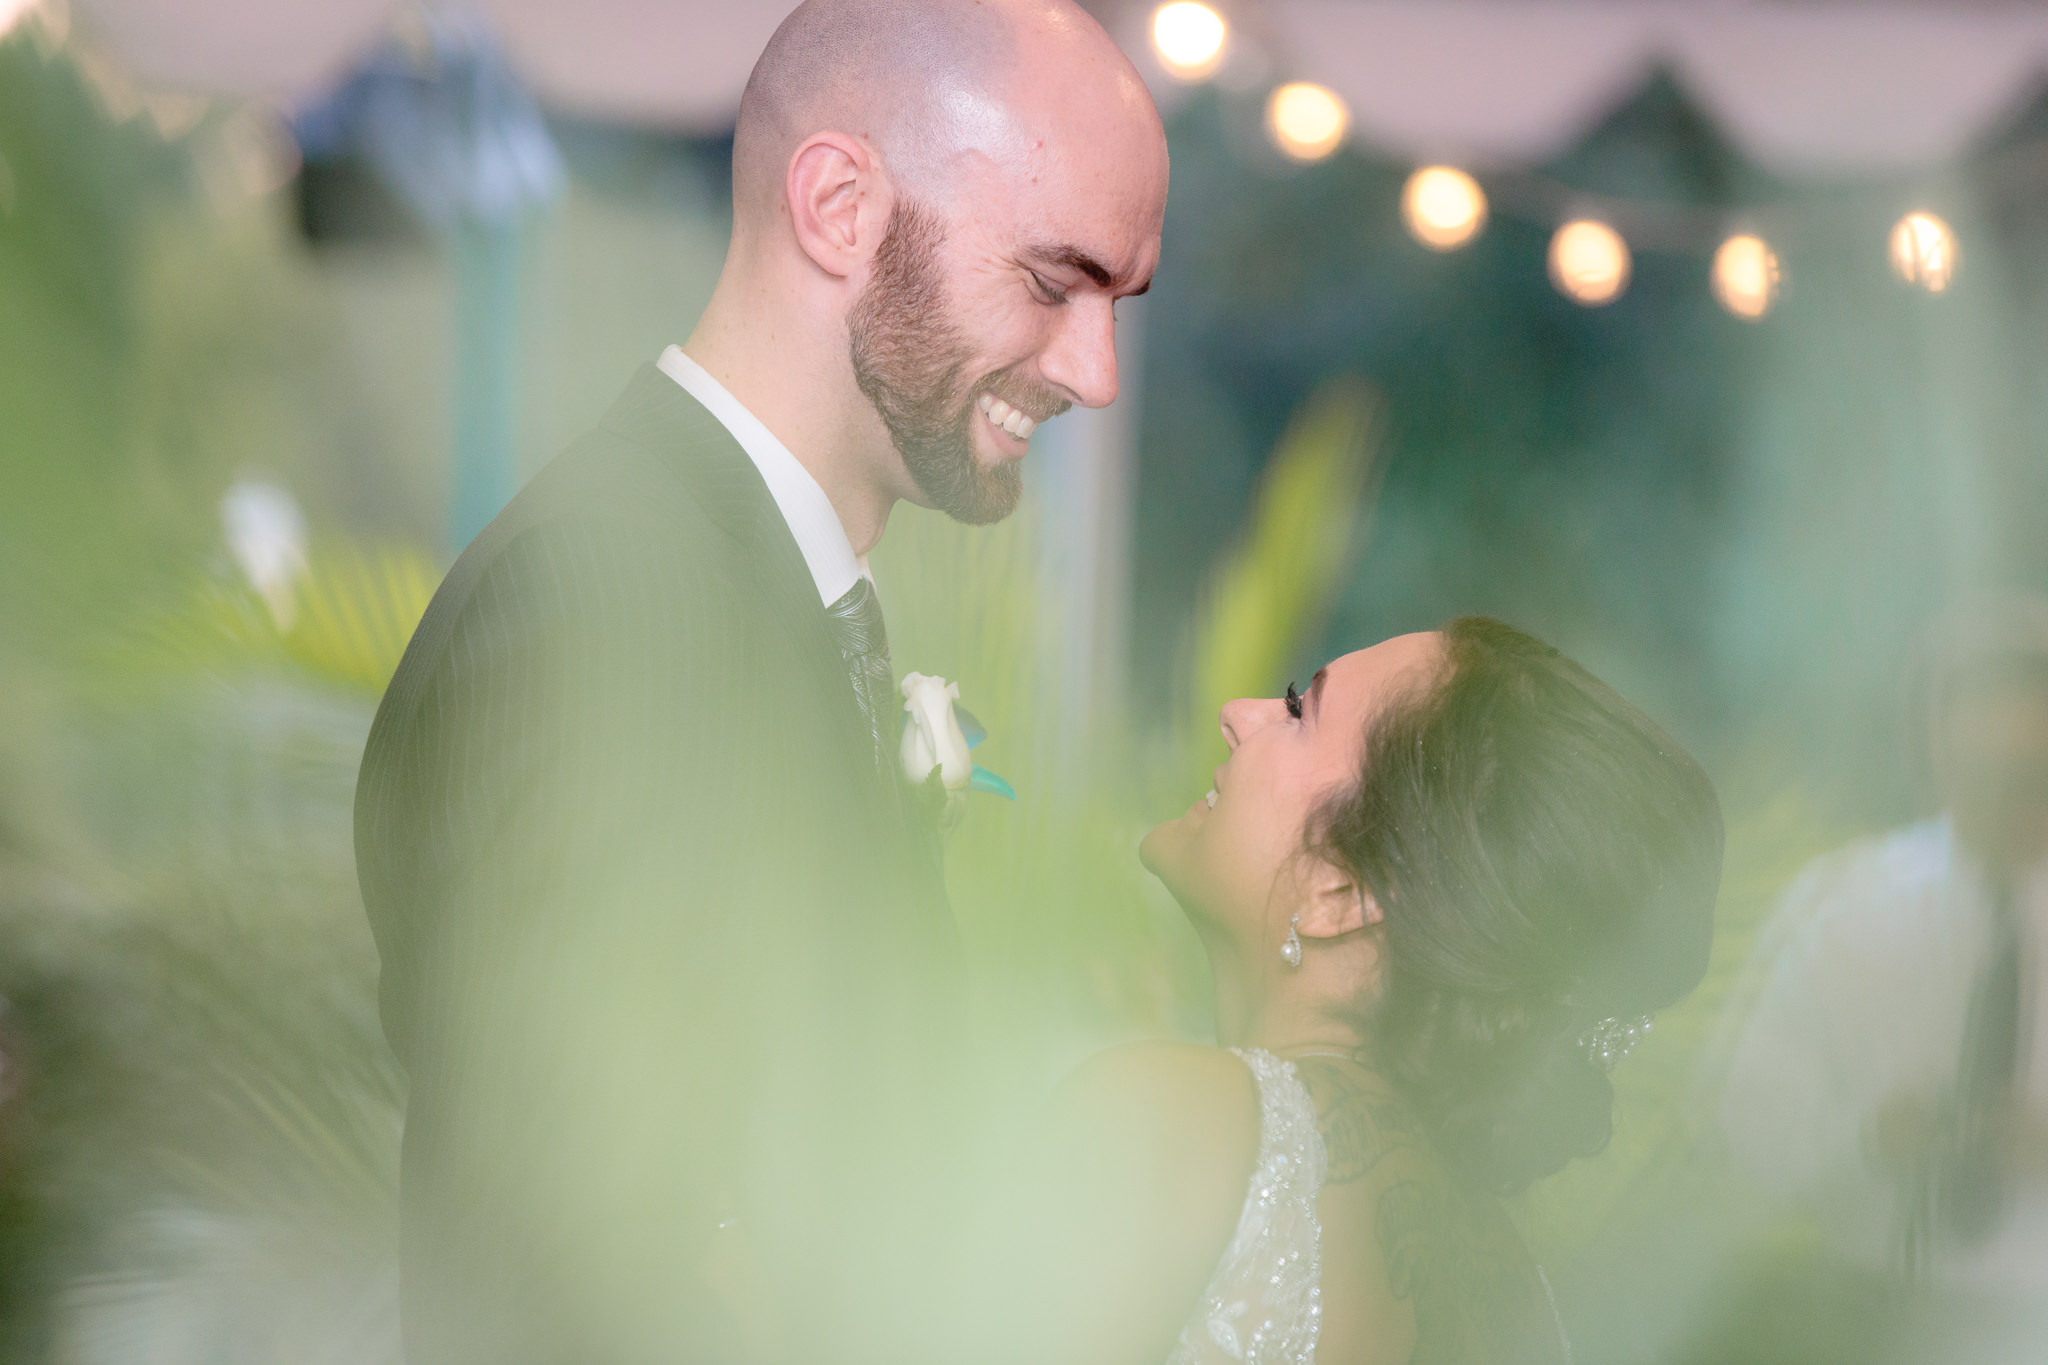 Bride & groom share their first dance at the National Aviary